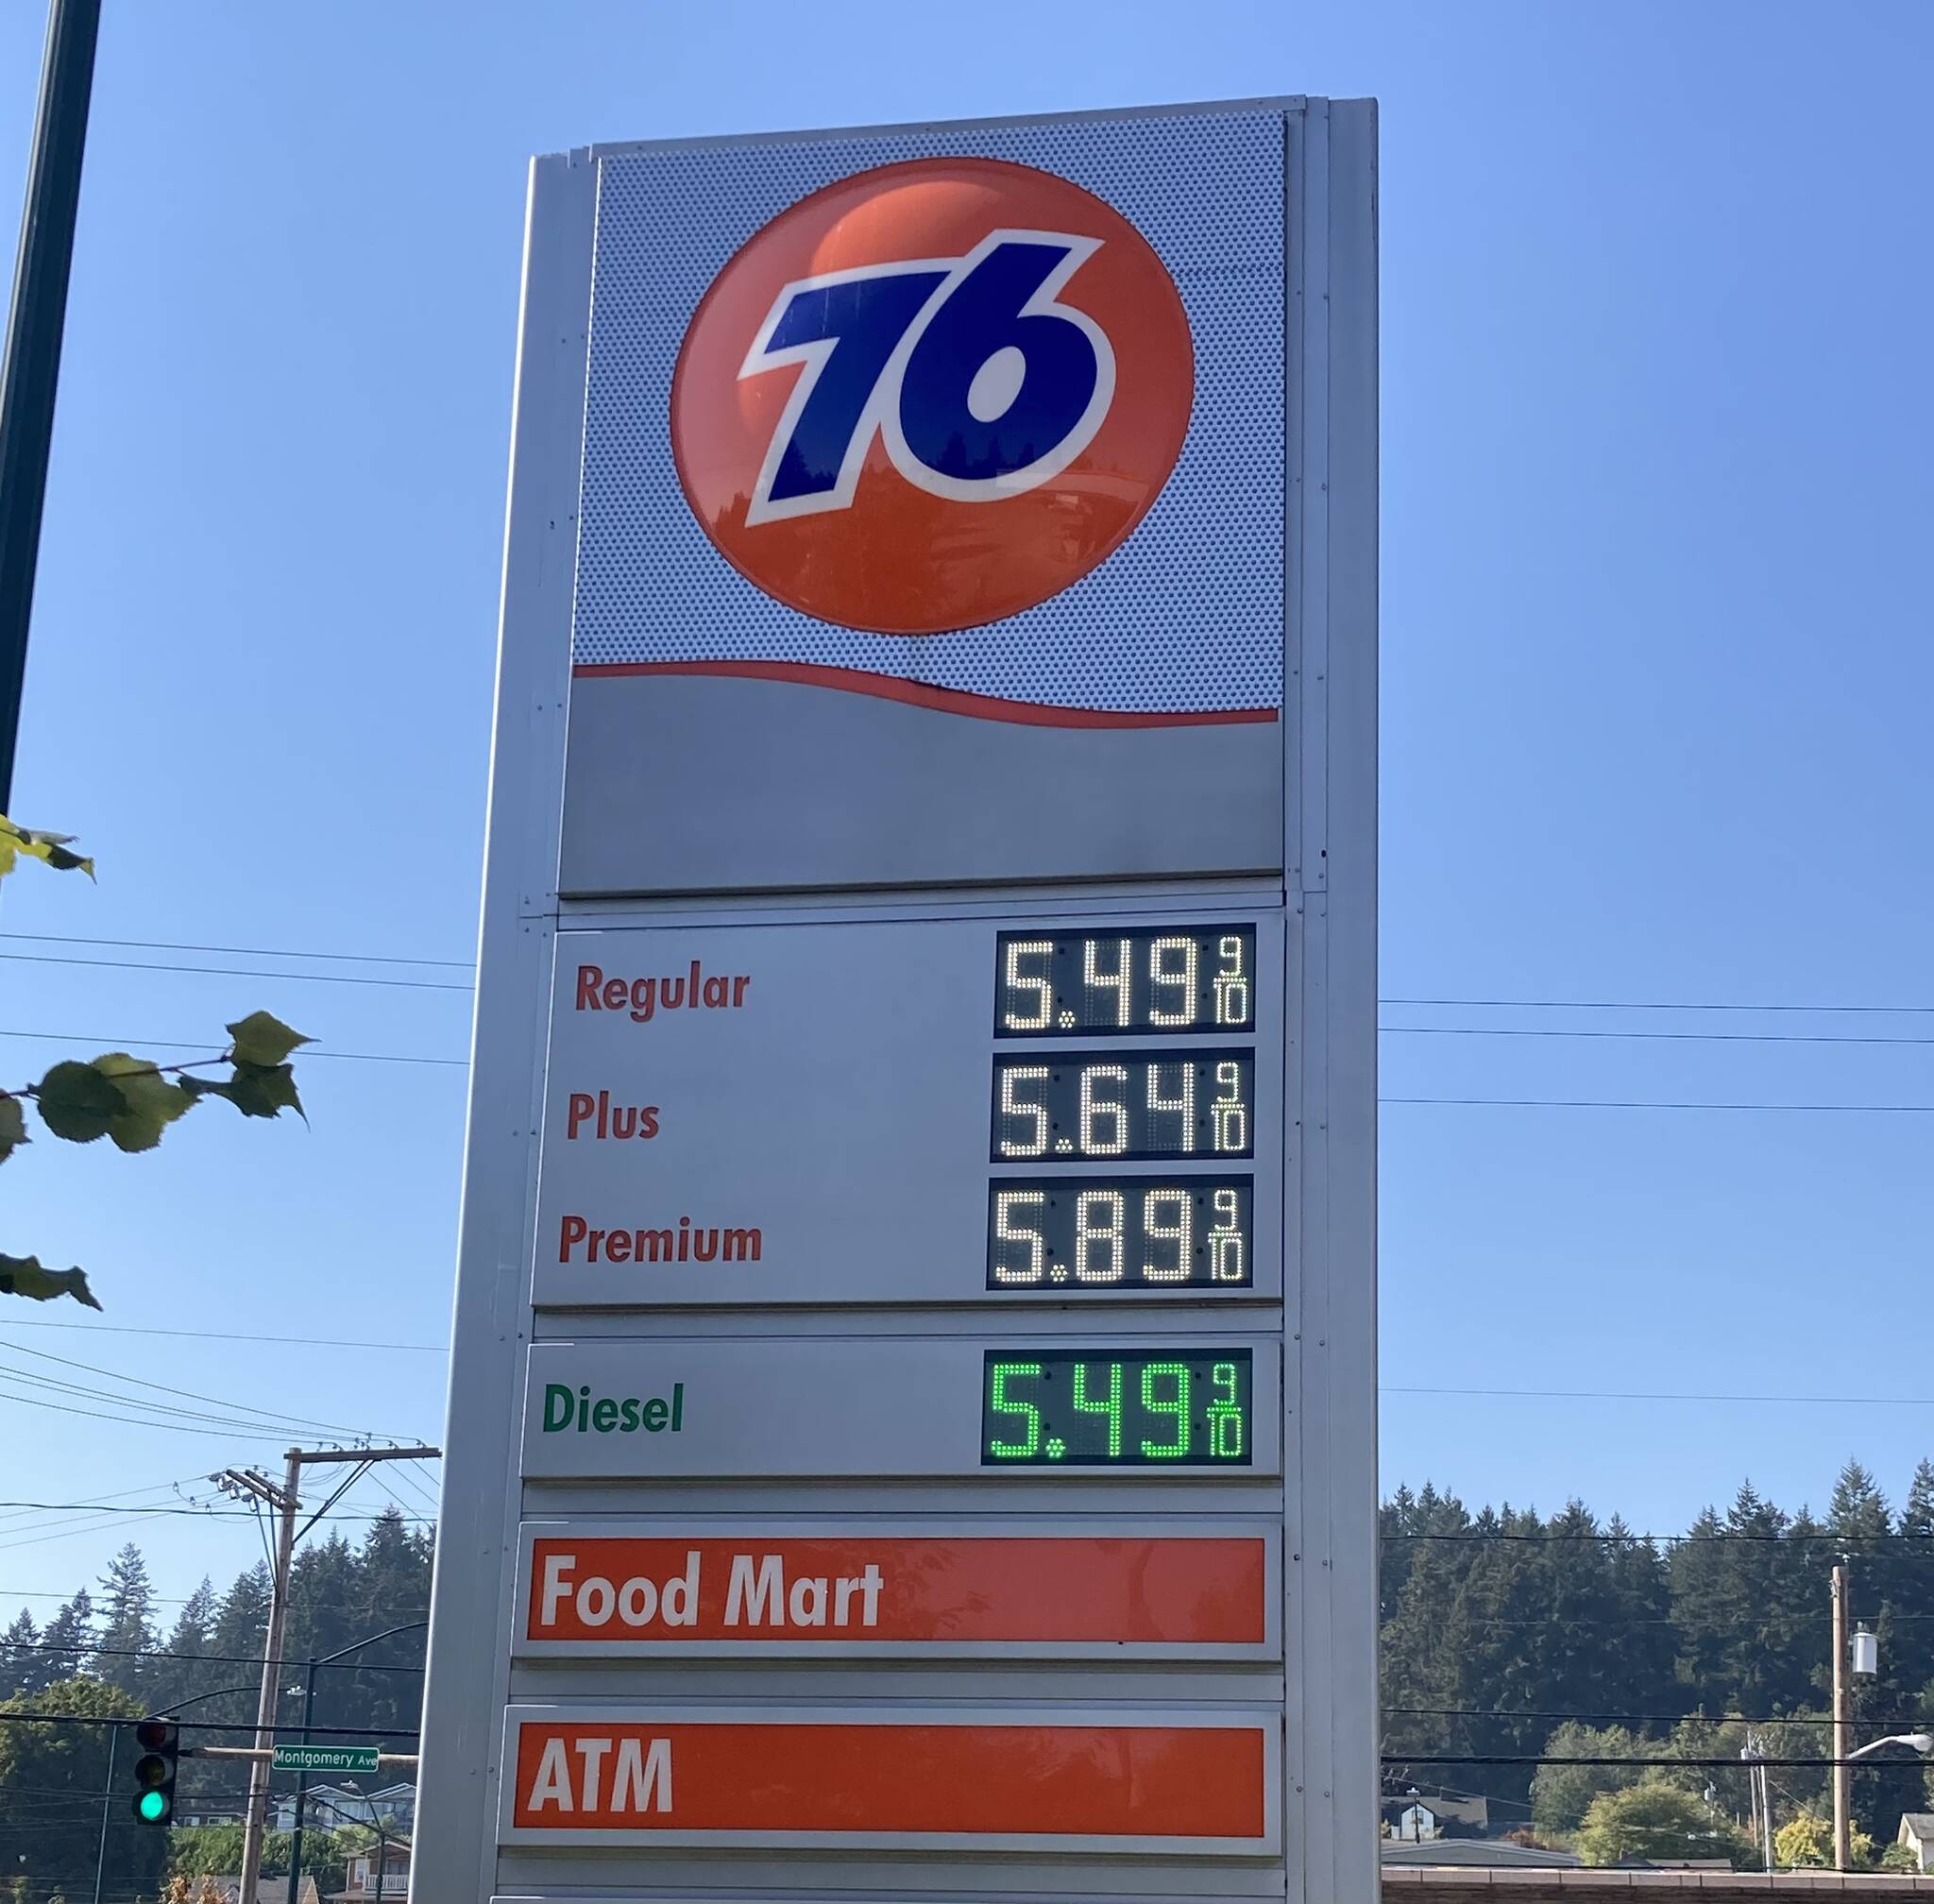 The Burwell 76 station in Bremerton displays one of the highest prices in town as of Sept. 27, with premium reaching close to $6 a gallon. Elisha Meyer/Kitsap News Group